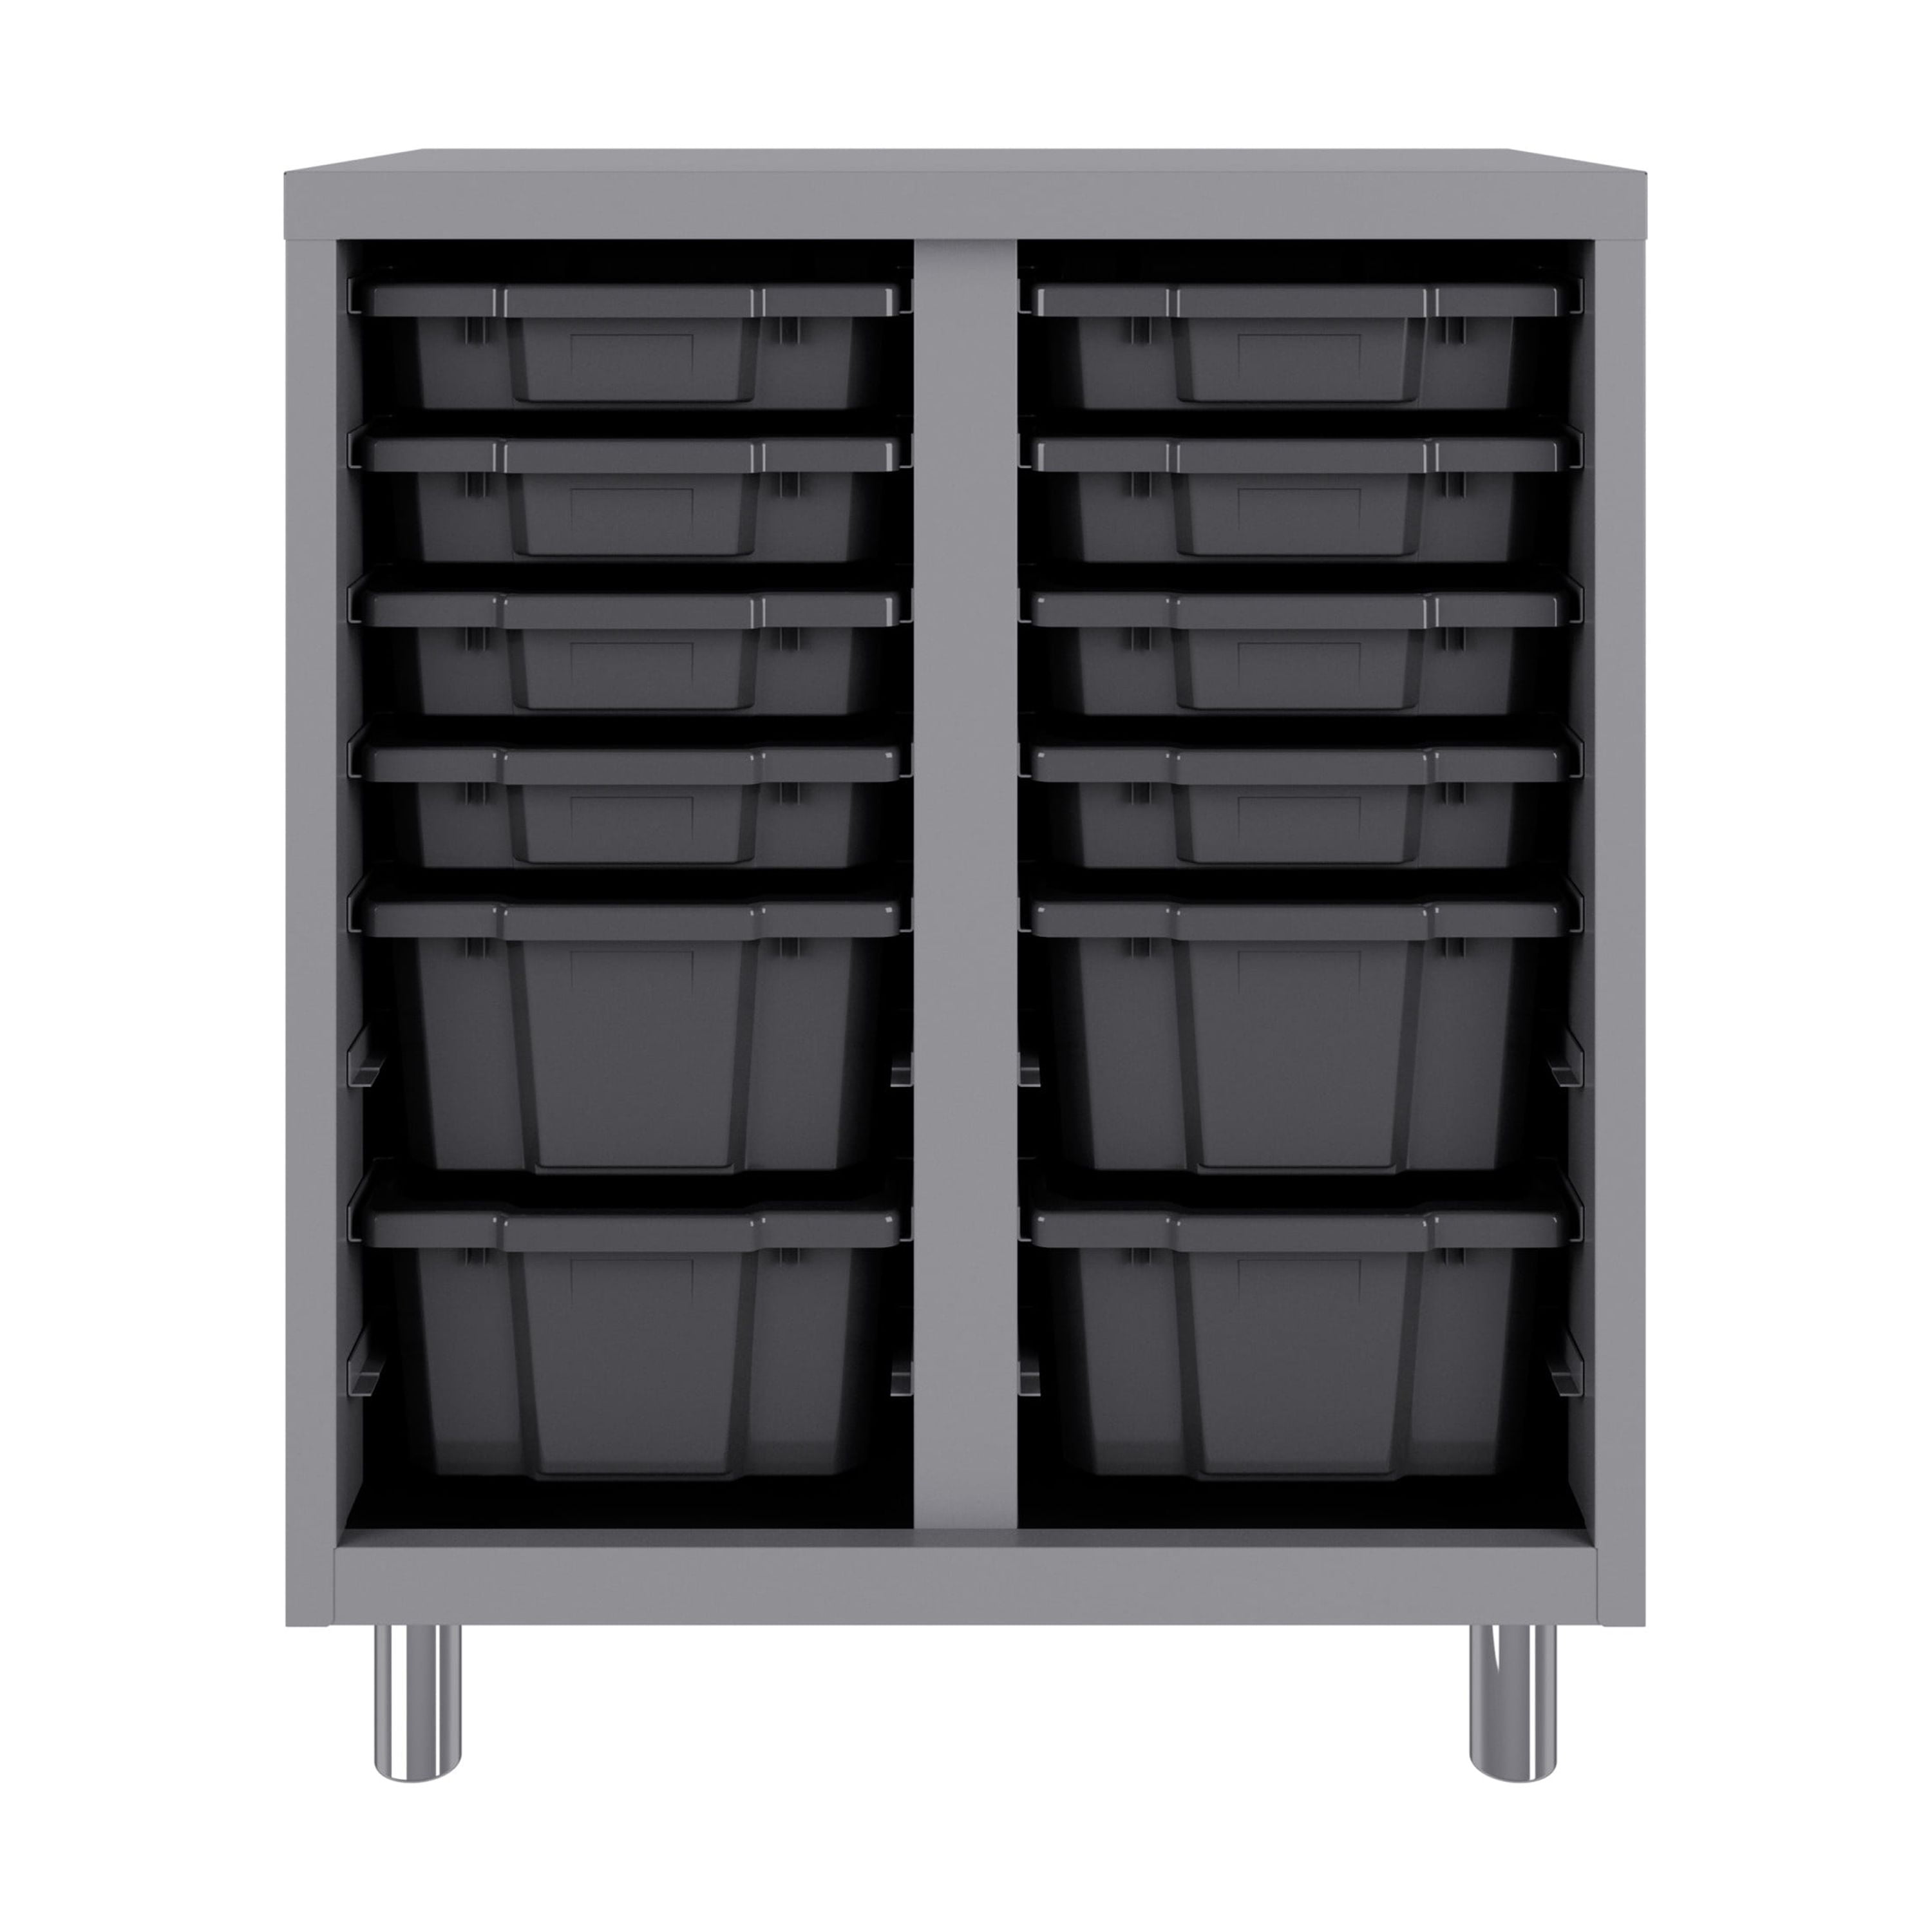 Space Solutions Bin Storage Cabinet with 16 plastic tote bins